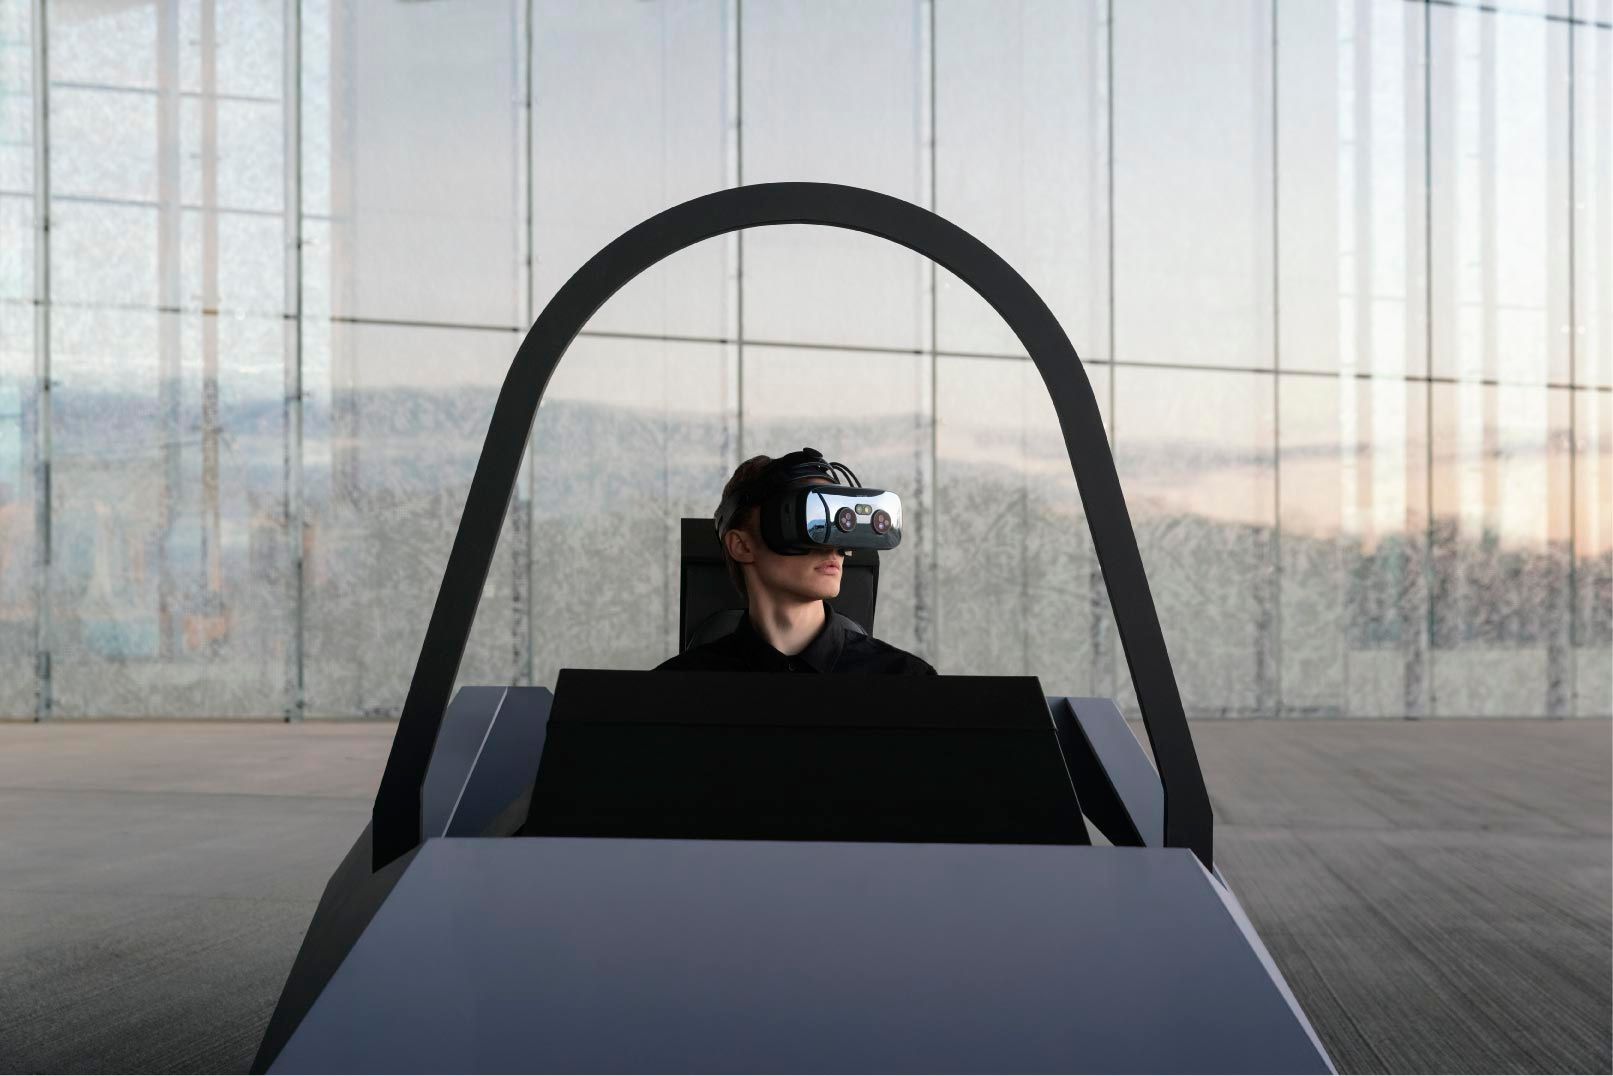 Whitepaper: Using Virtual Reality and Mixed Reality for Pilot Training and Simulation